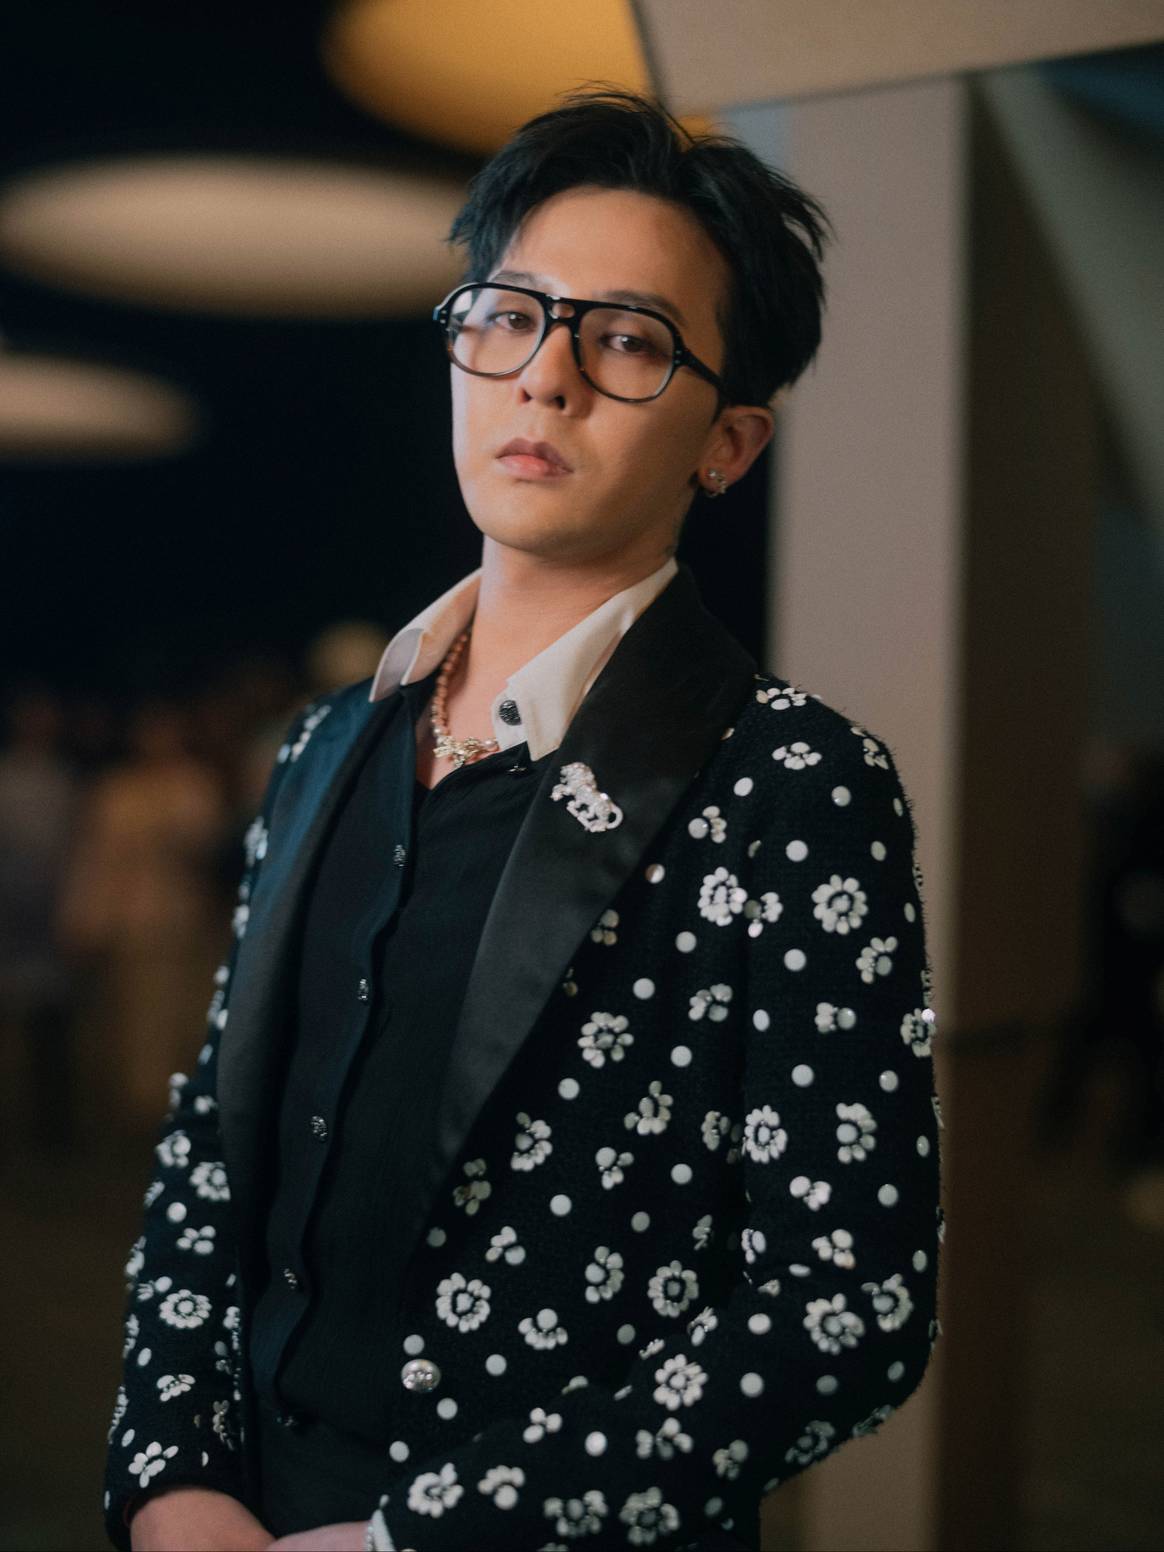 BigBang's G-Dragon at Chanel's Haute Couture SS23 show. Image: Chanel